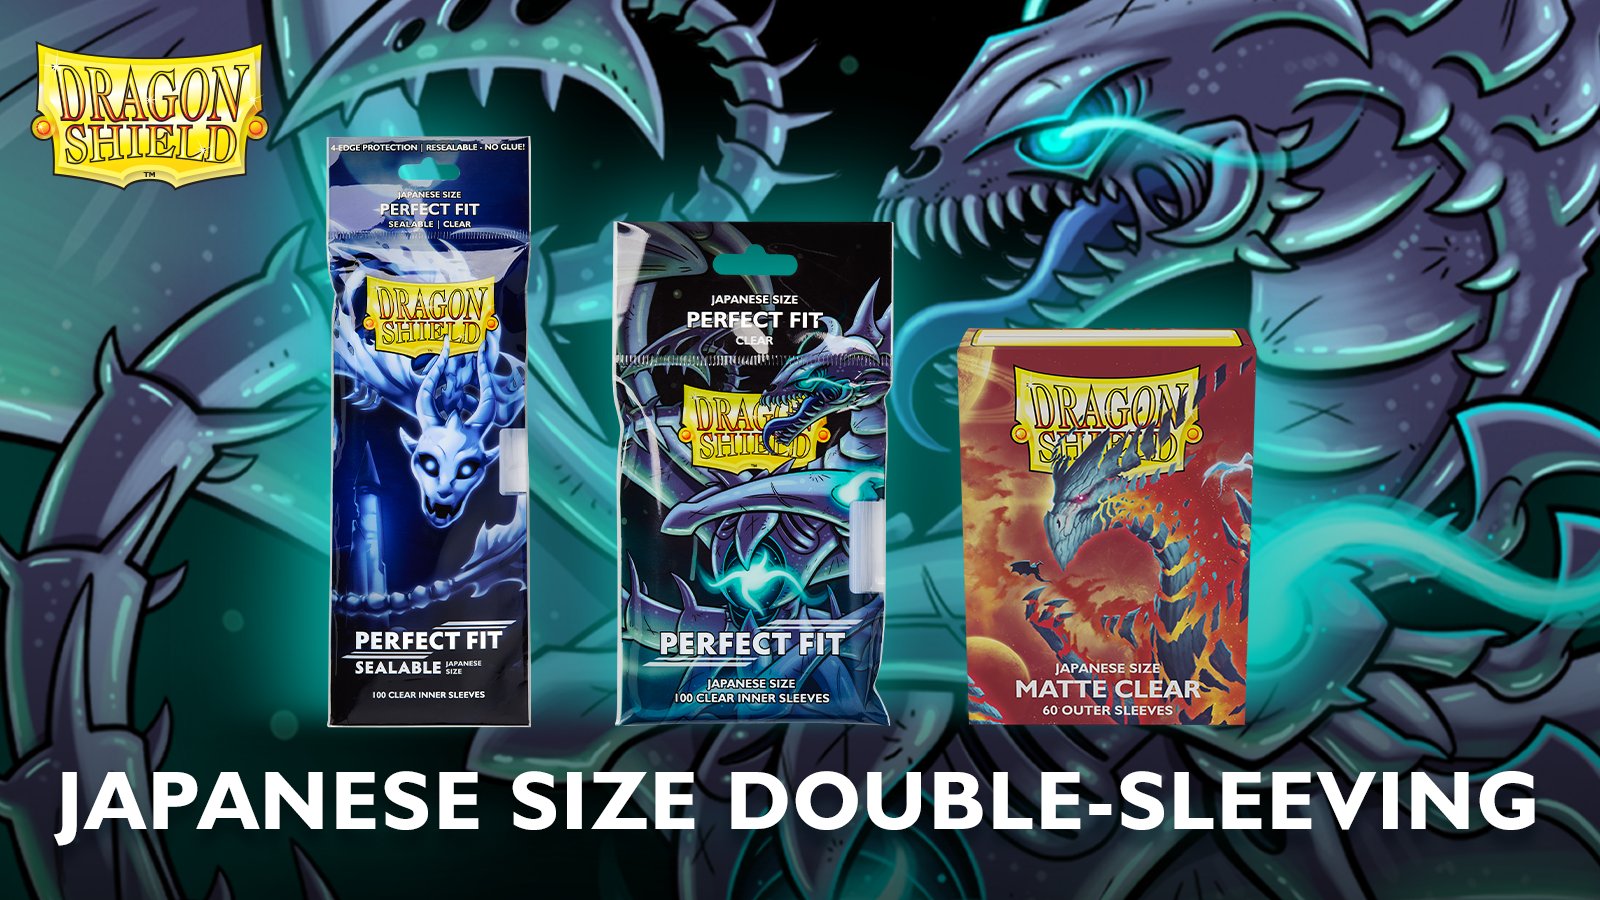 Dragon Shield on X: Double-sleeving is coming to Japanese size! Three new  options: - Perfect Fit toploader inner sleeves - Perfect Fit Sealable inner  sleeves - Oversleeves Available August, but you can